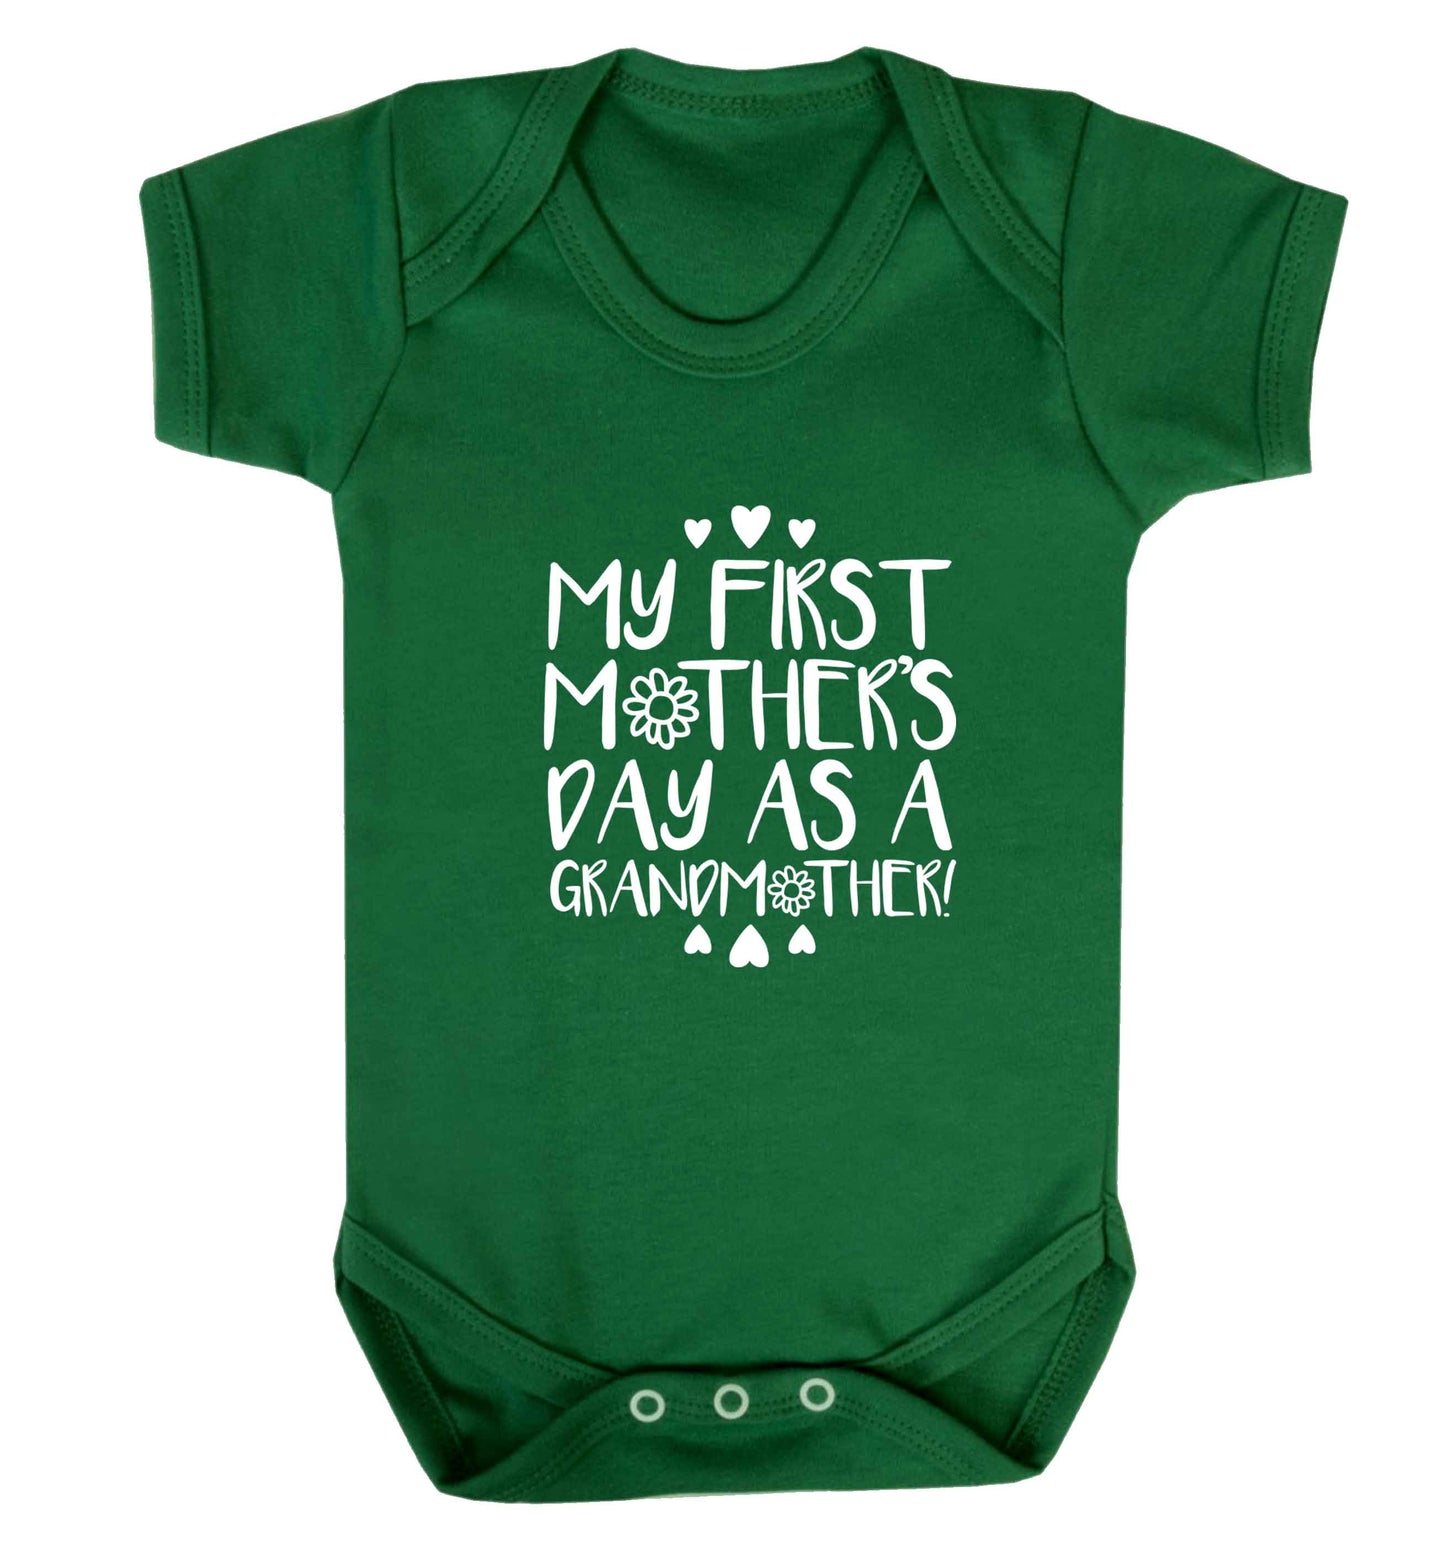 It's my first mother's day as a grandmother baby vest green 18-24 months